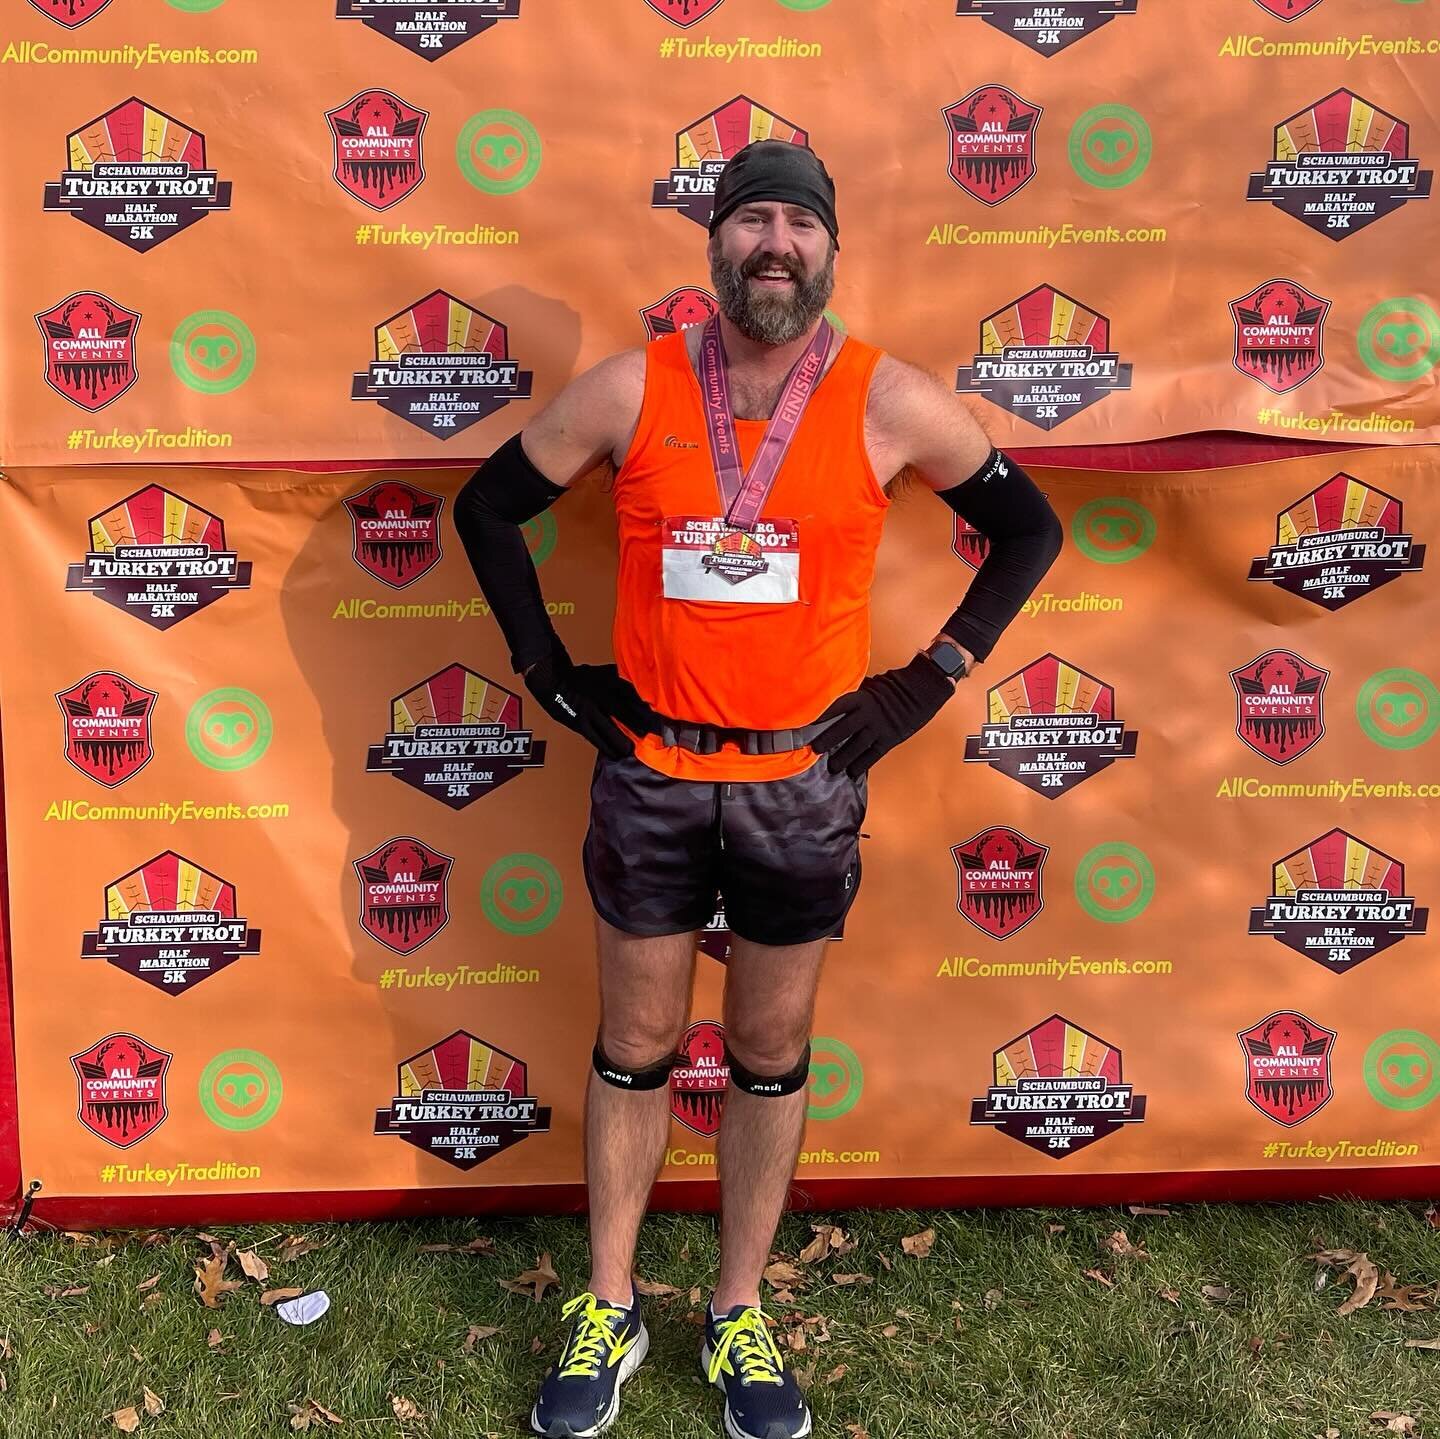 NEW HALF PR - 1:51:32! Beat my 2019 time by over 4 minutes. Perfect weather - 27 degrees, no wind, partly cloudy - with Jill and the boys cheering me along the way!! One more race to go this year. Going to try and sneak another full in next month.